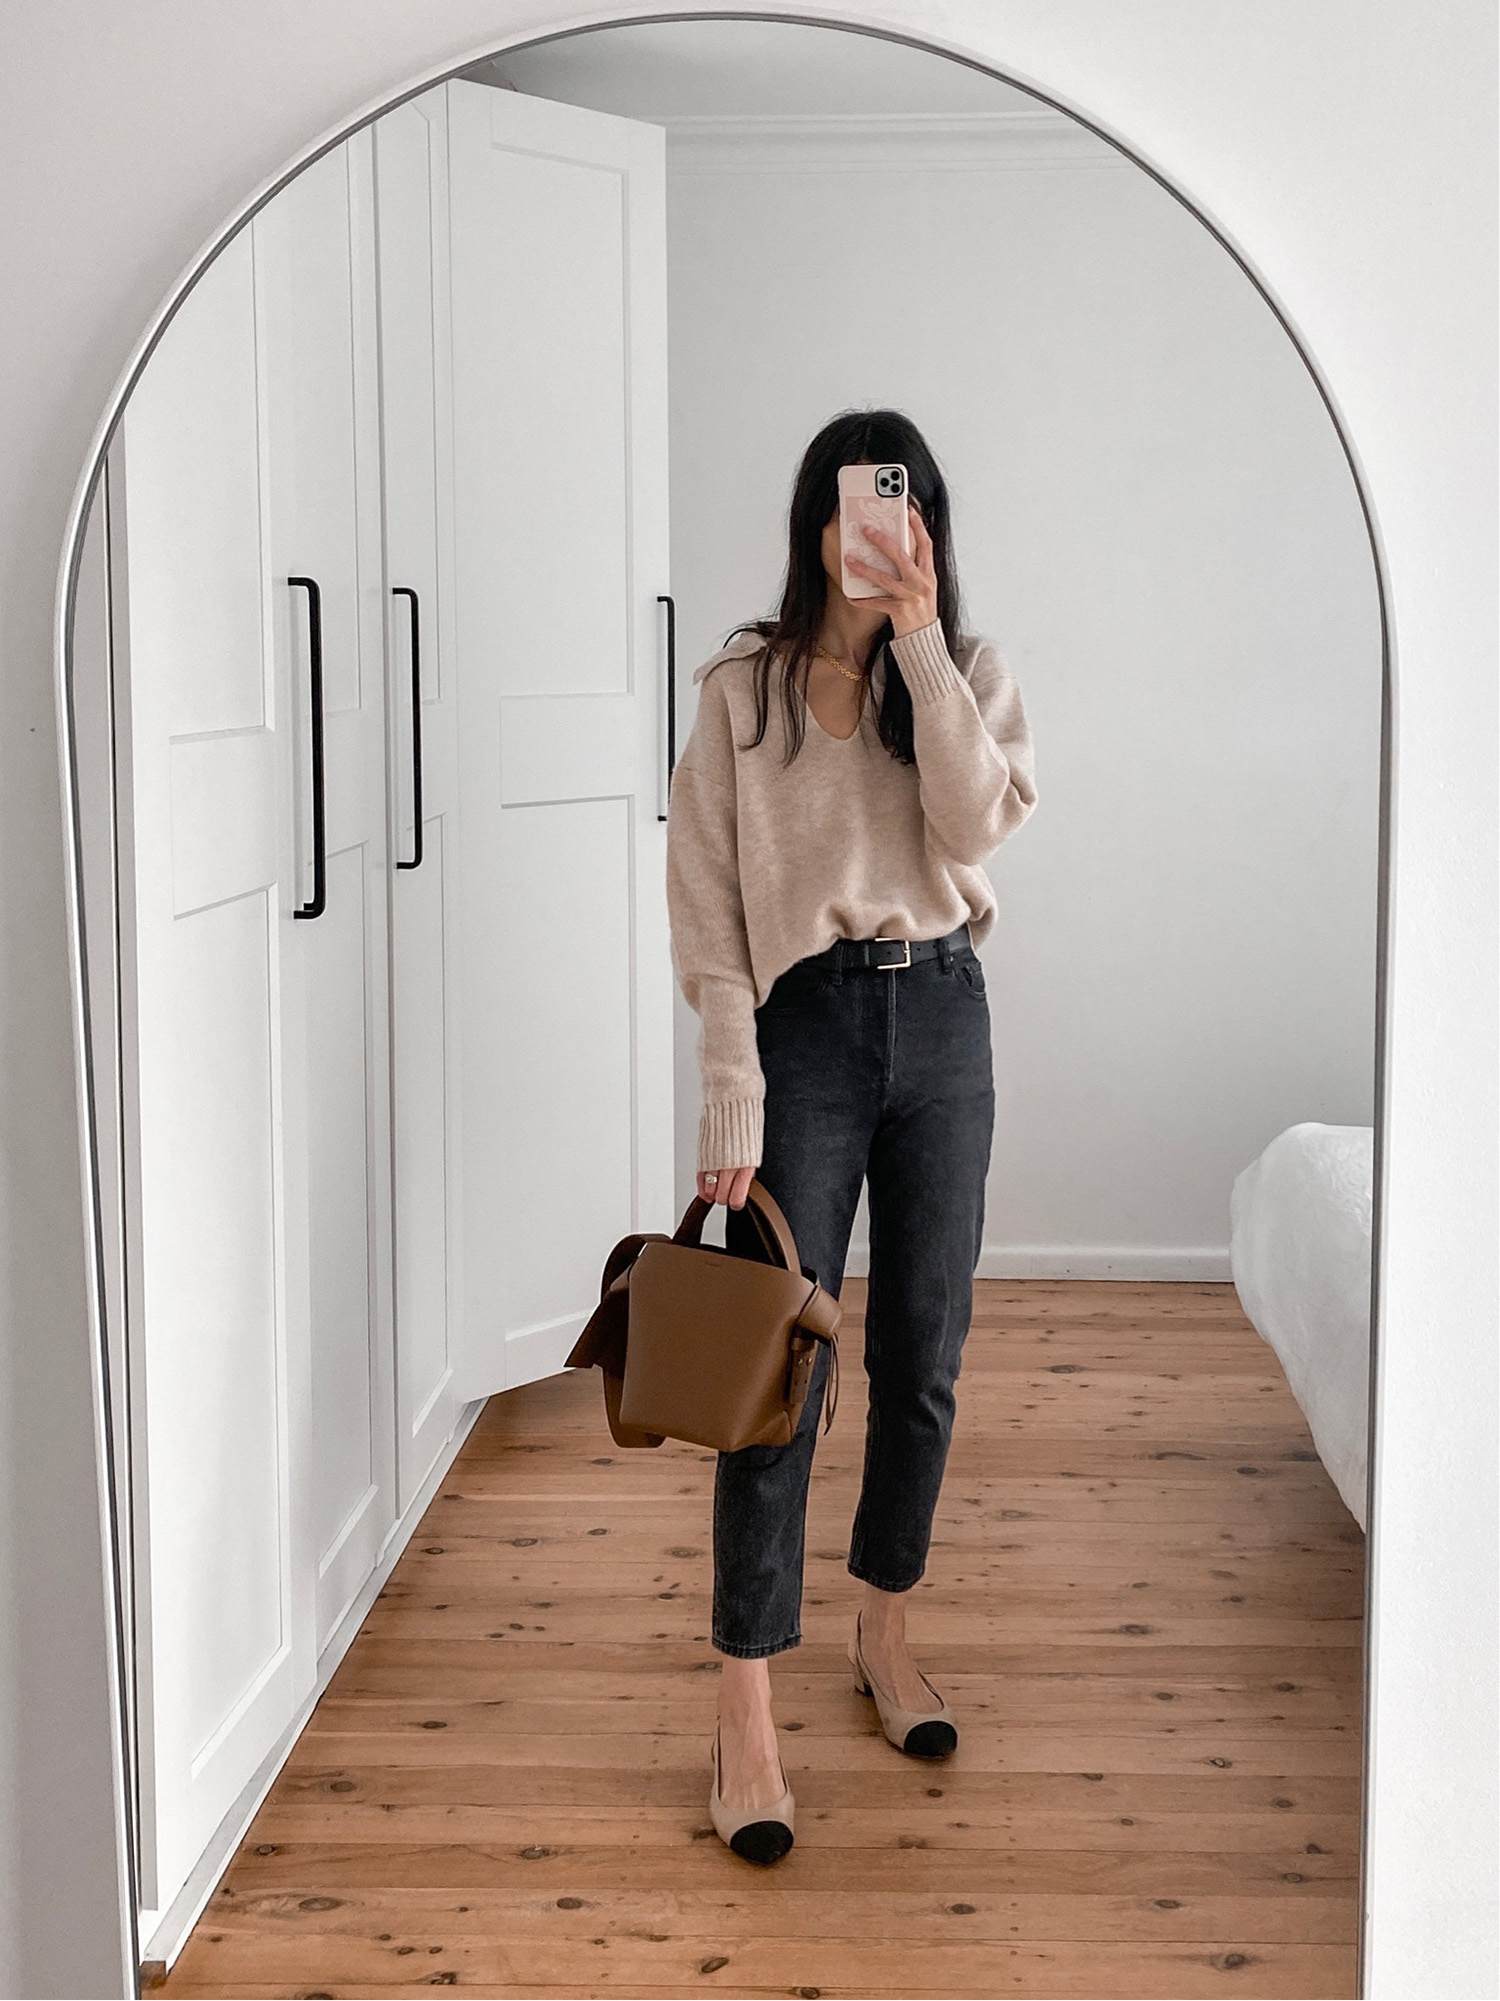 Wearing Venroy cashmere sweater with Everlane 90s cheeky jeans and two tone pumps